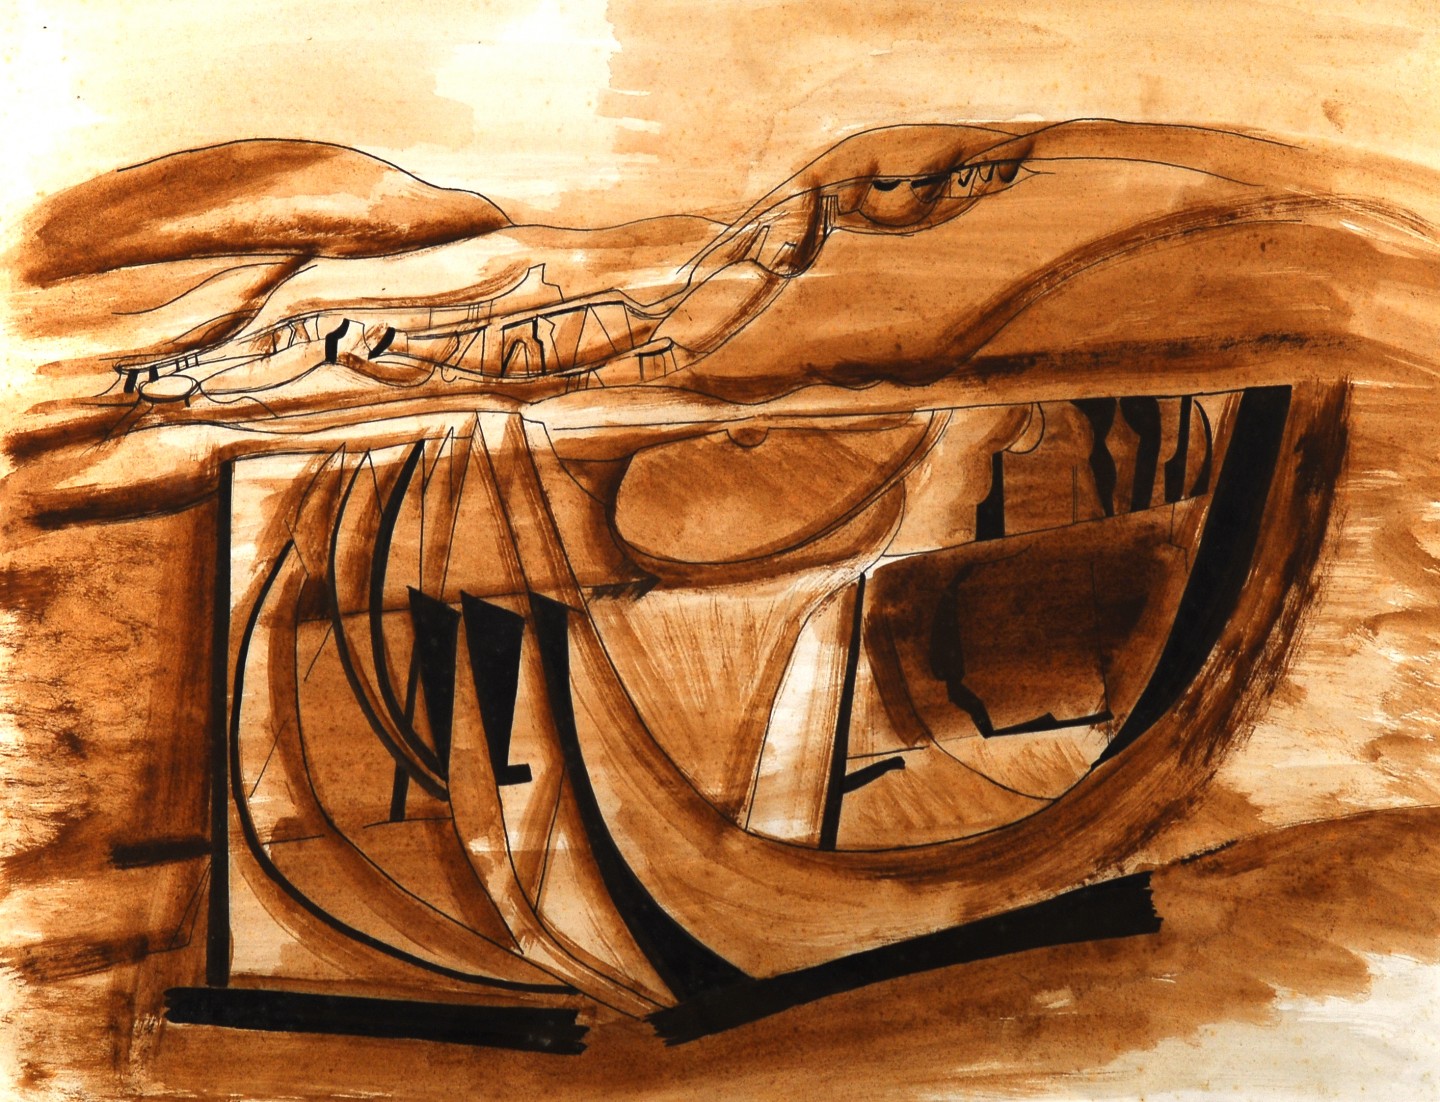 Clay Workings, Chiusure, 1954, pencil and tempera on paper